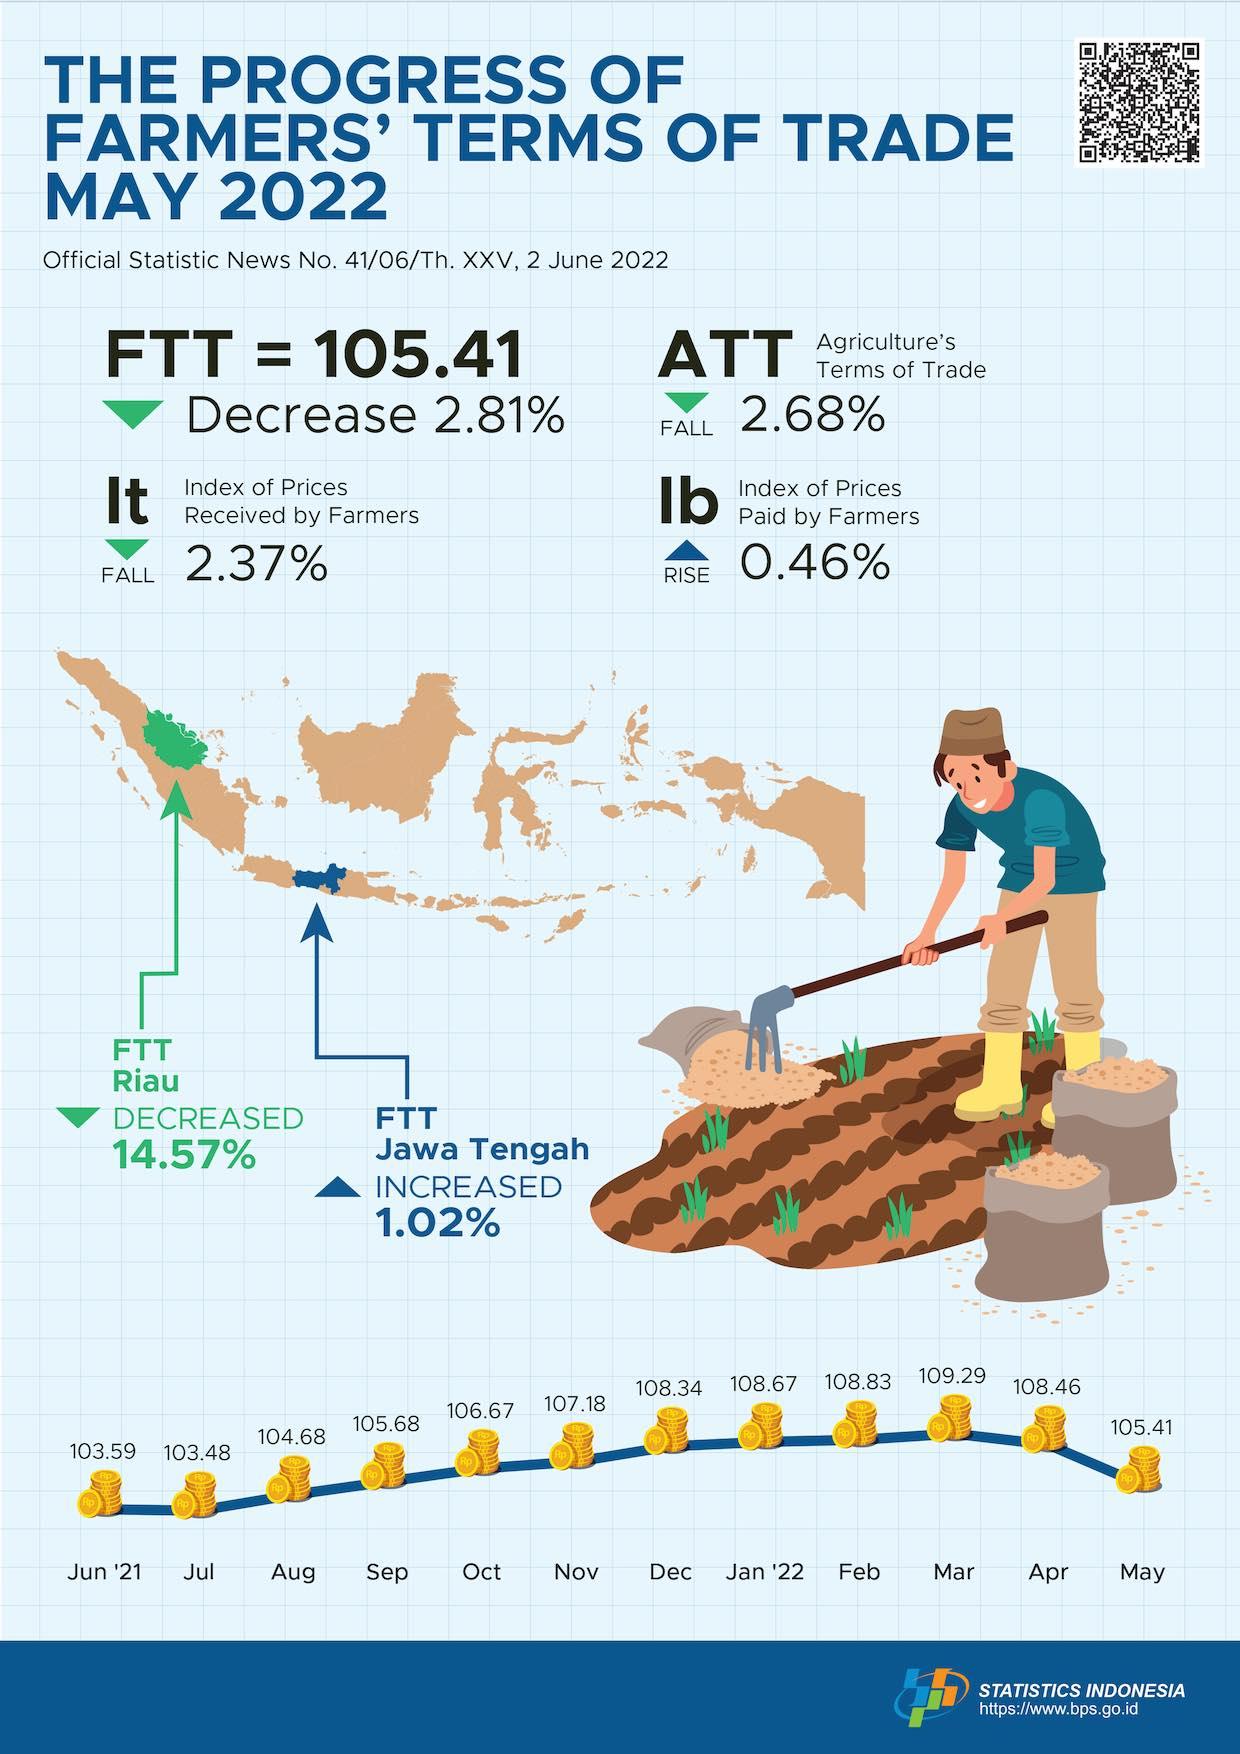 Farmers’ Terms of Trade (FTT) May 2022 was 105.41 or dropped by 2.81 percent.